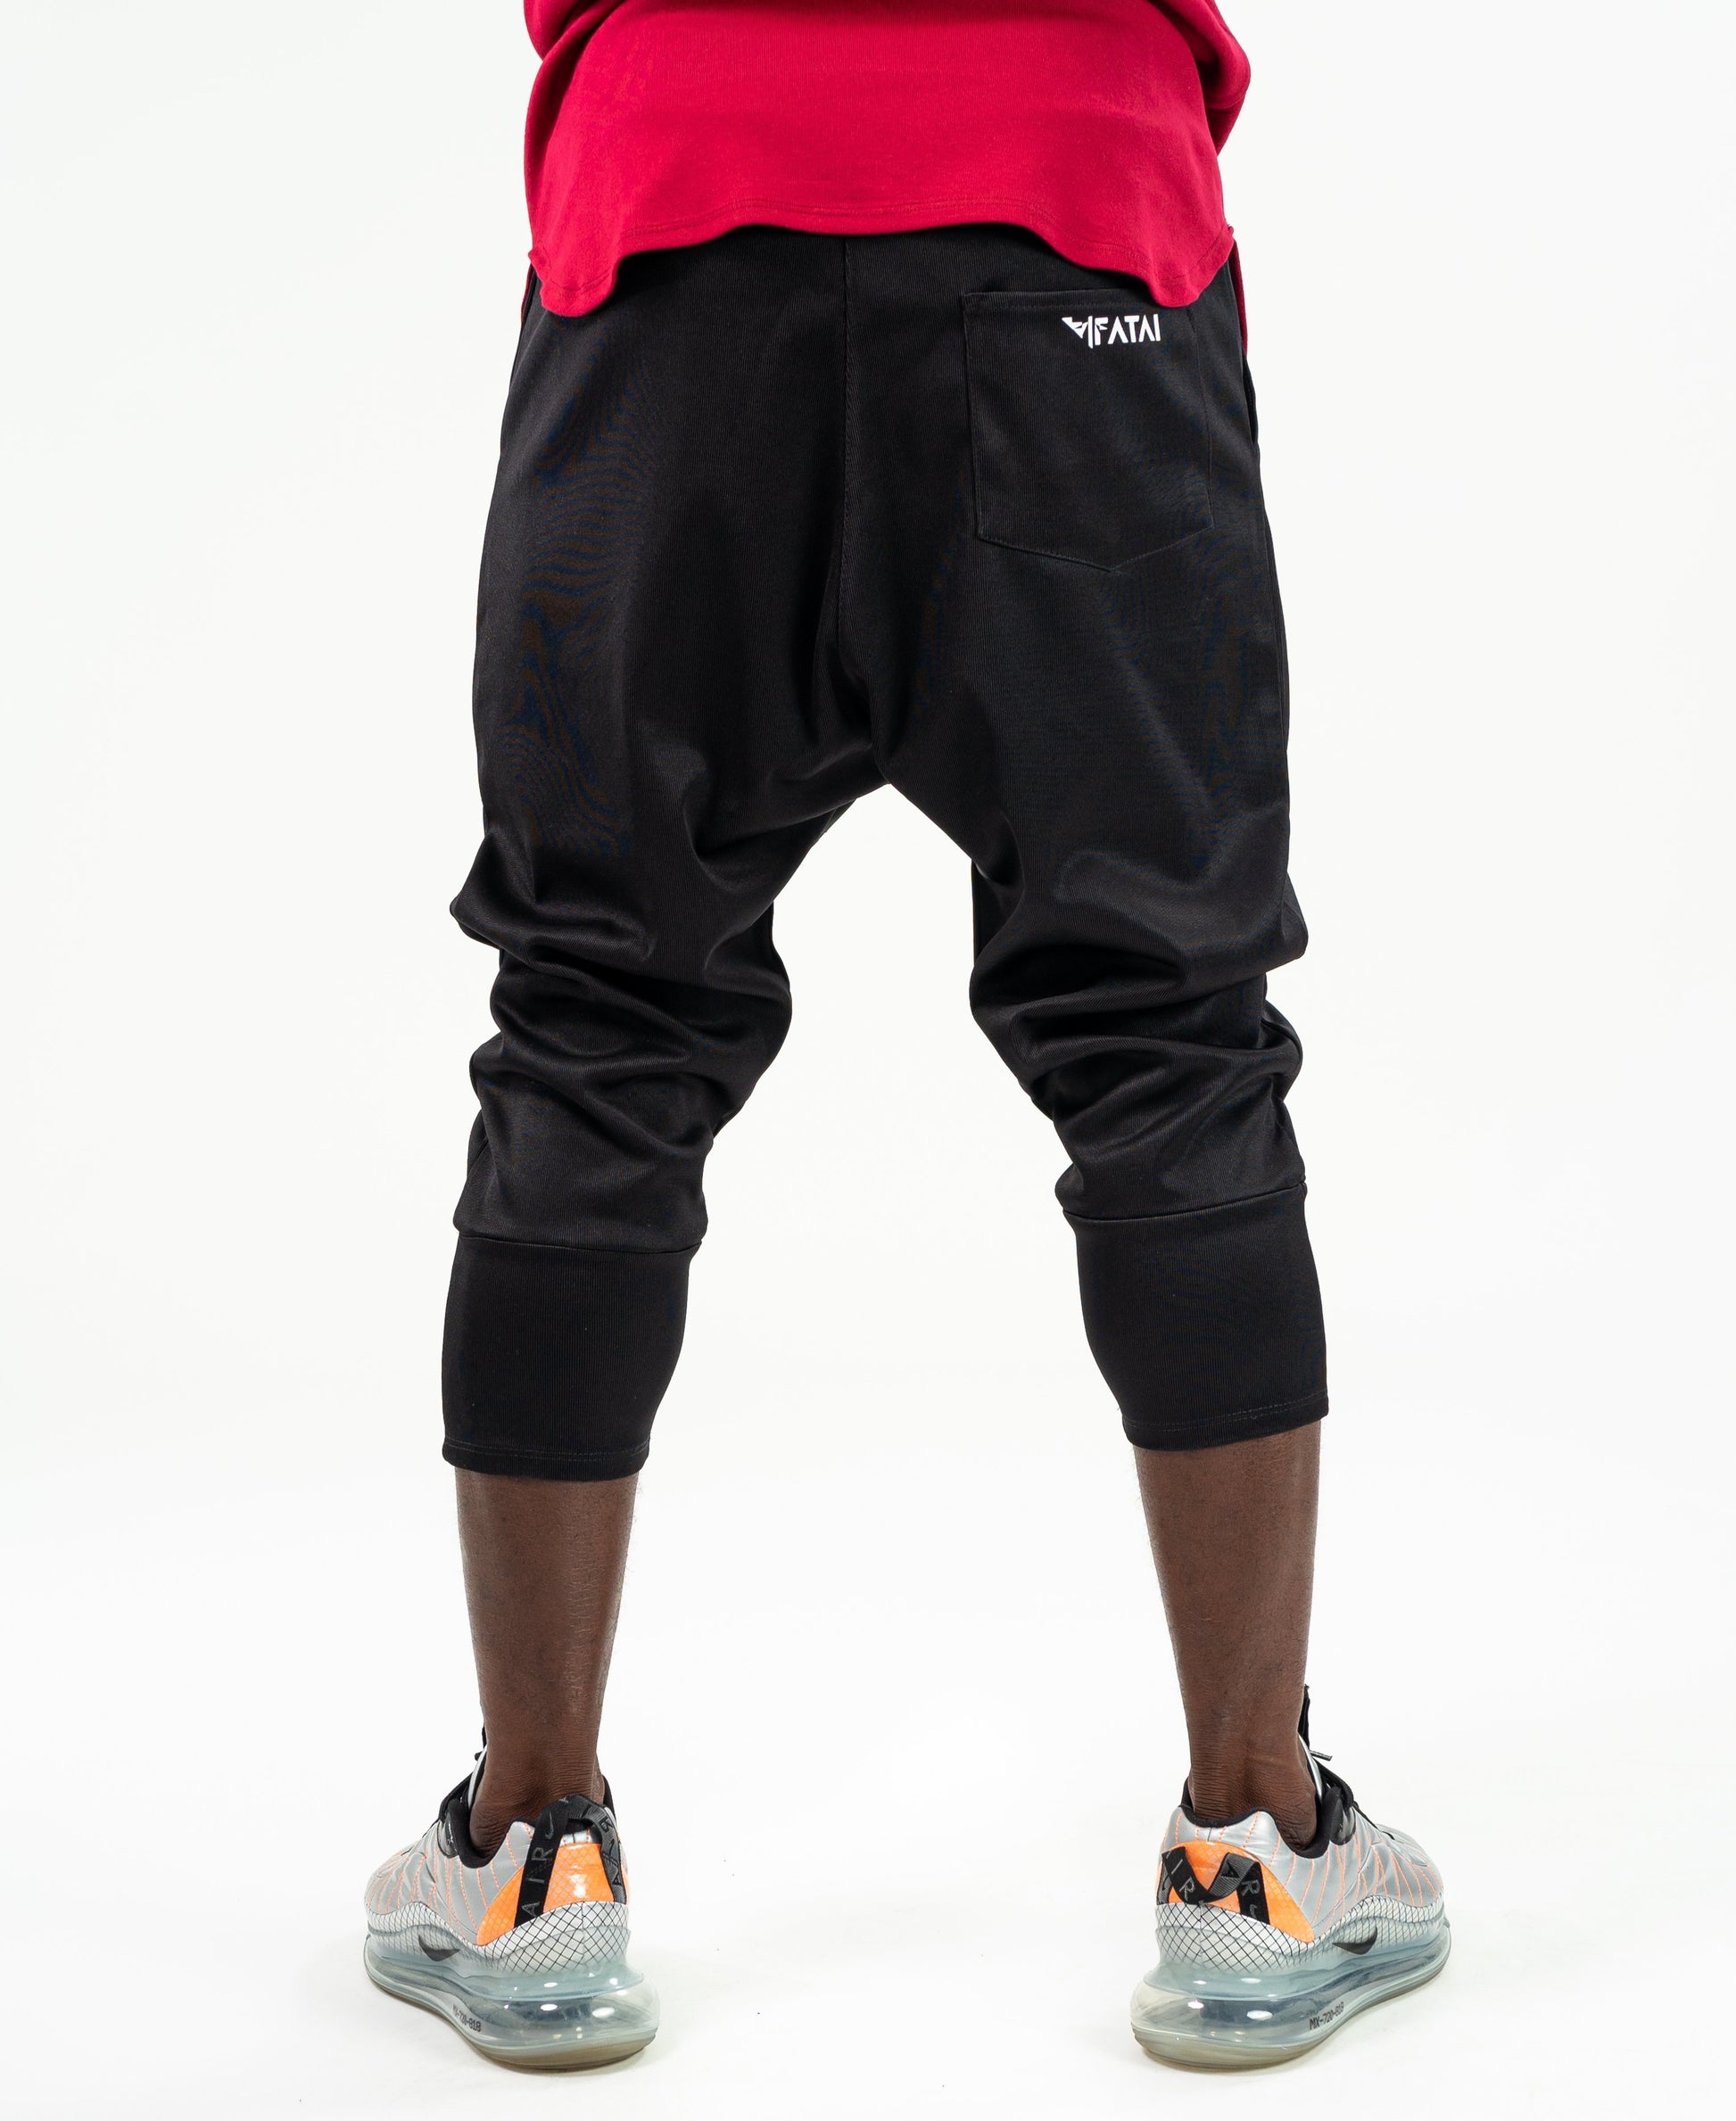 Short Black trousers with black side design - Fatai Style